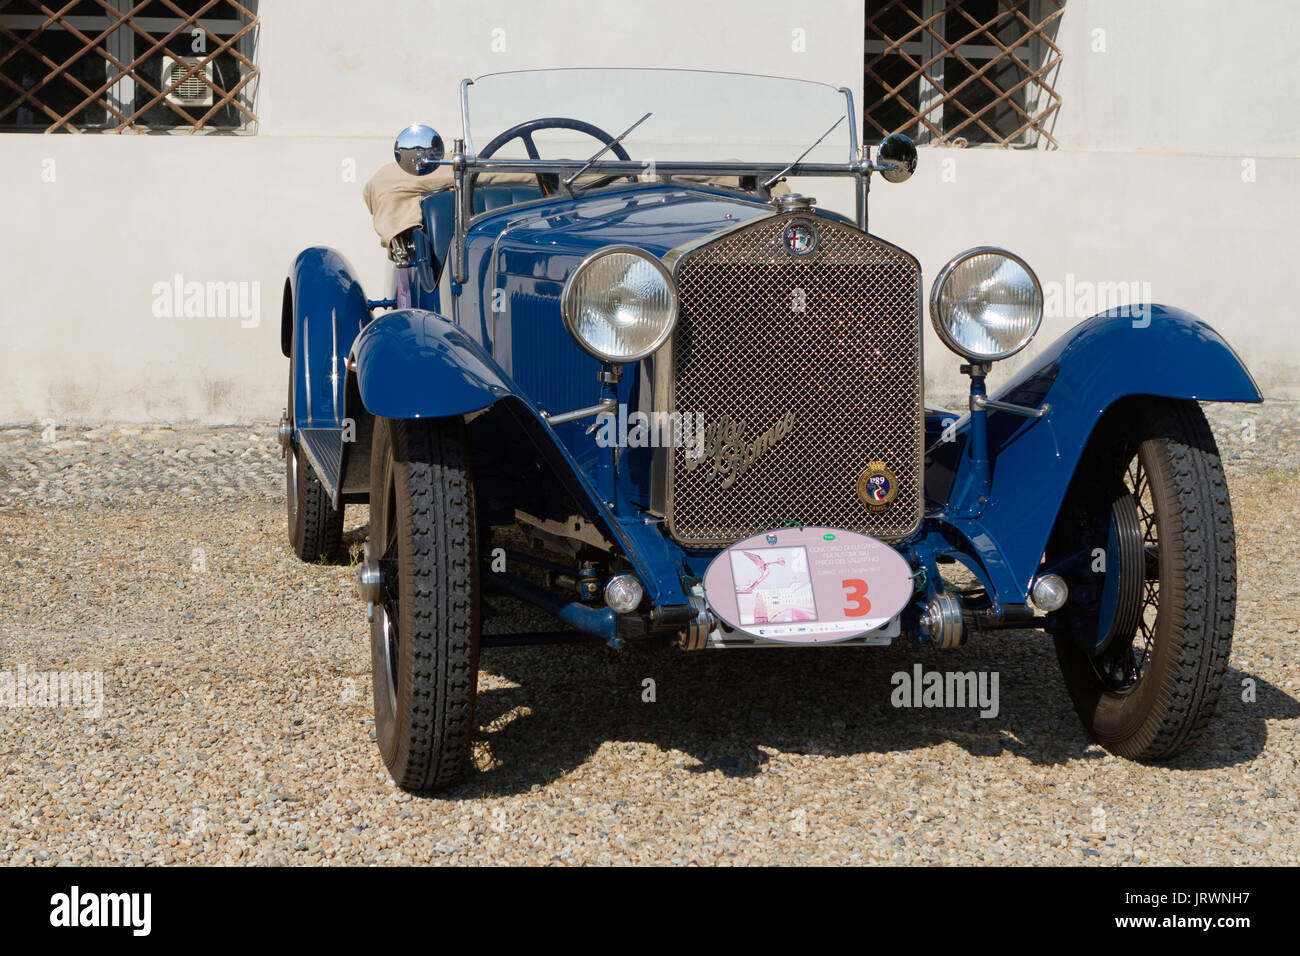 A 1929 Alfa Romeo 6 C 1750 Sport. Vintage cars and sportscar on exhibition in Torino during Parco Valentino car show. Stock Photo